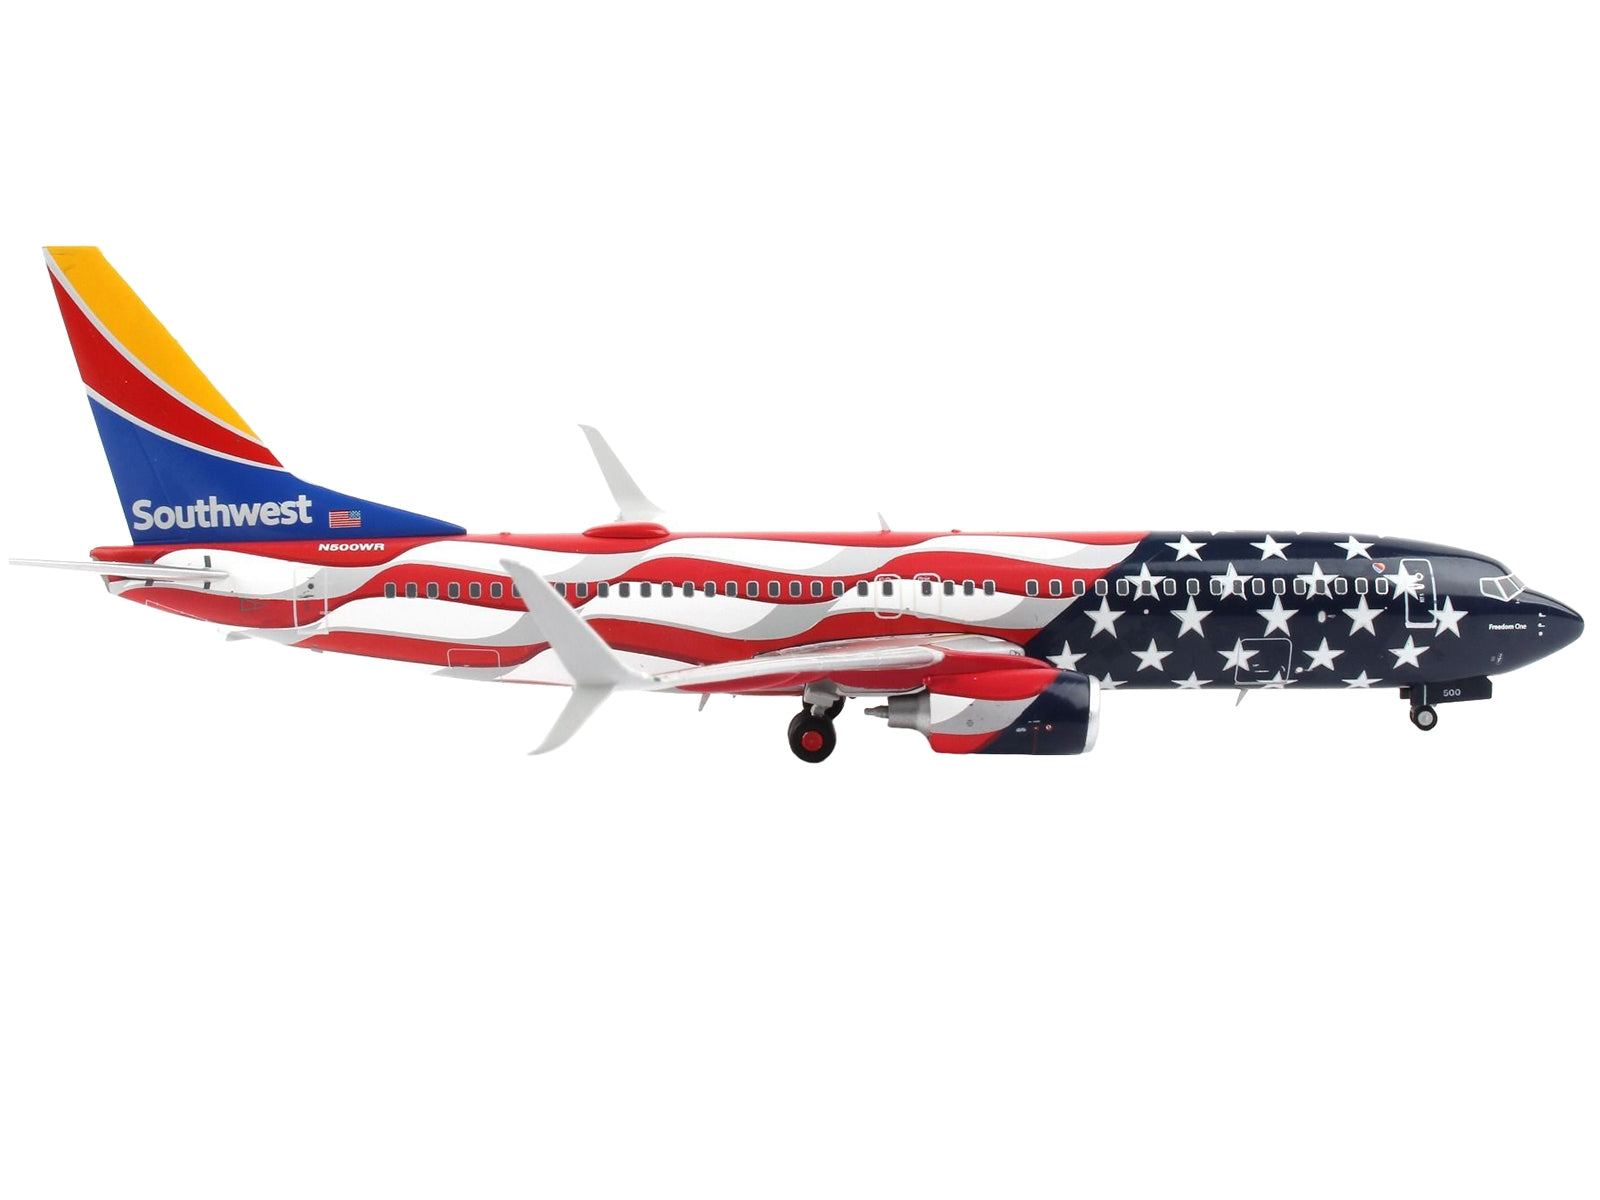 Boeing 737-800 Commercial Aircraft "Southwest Airlines - Freedom One" American Flag Livery